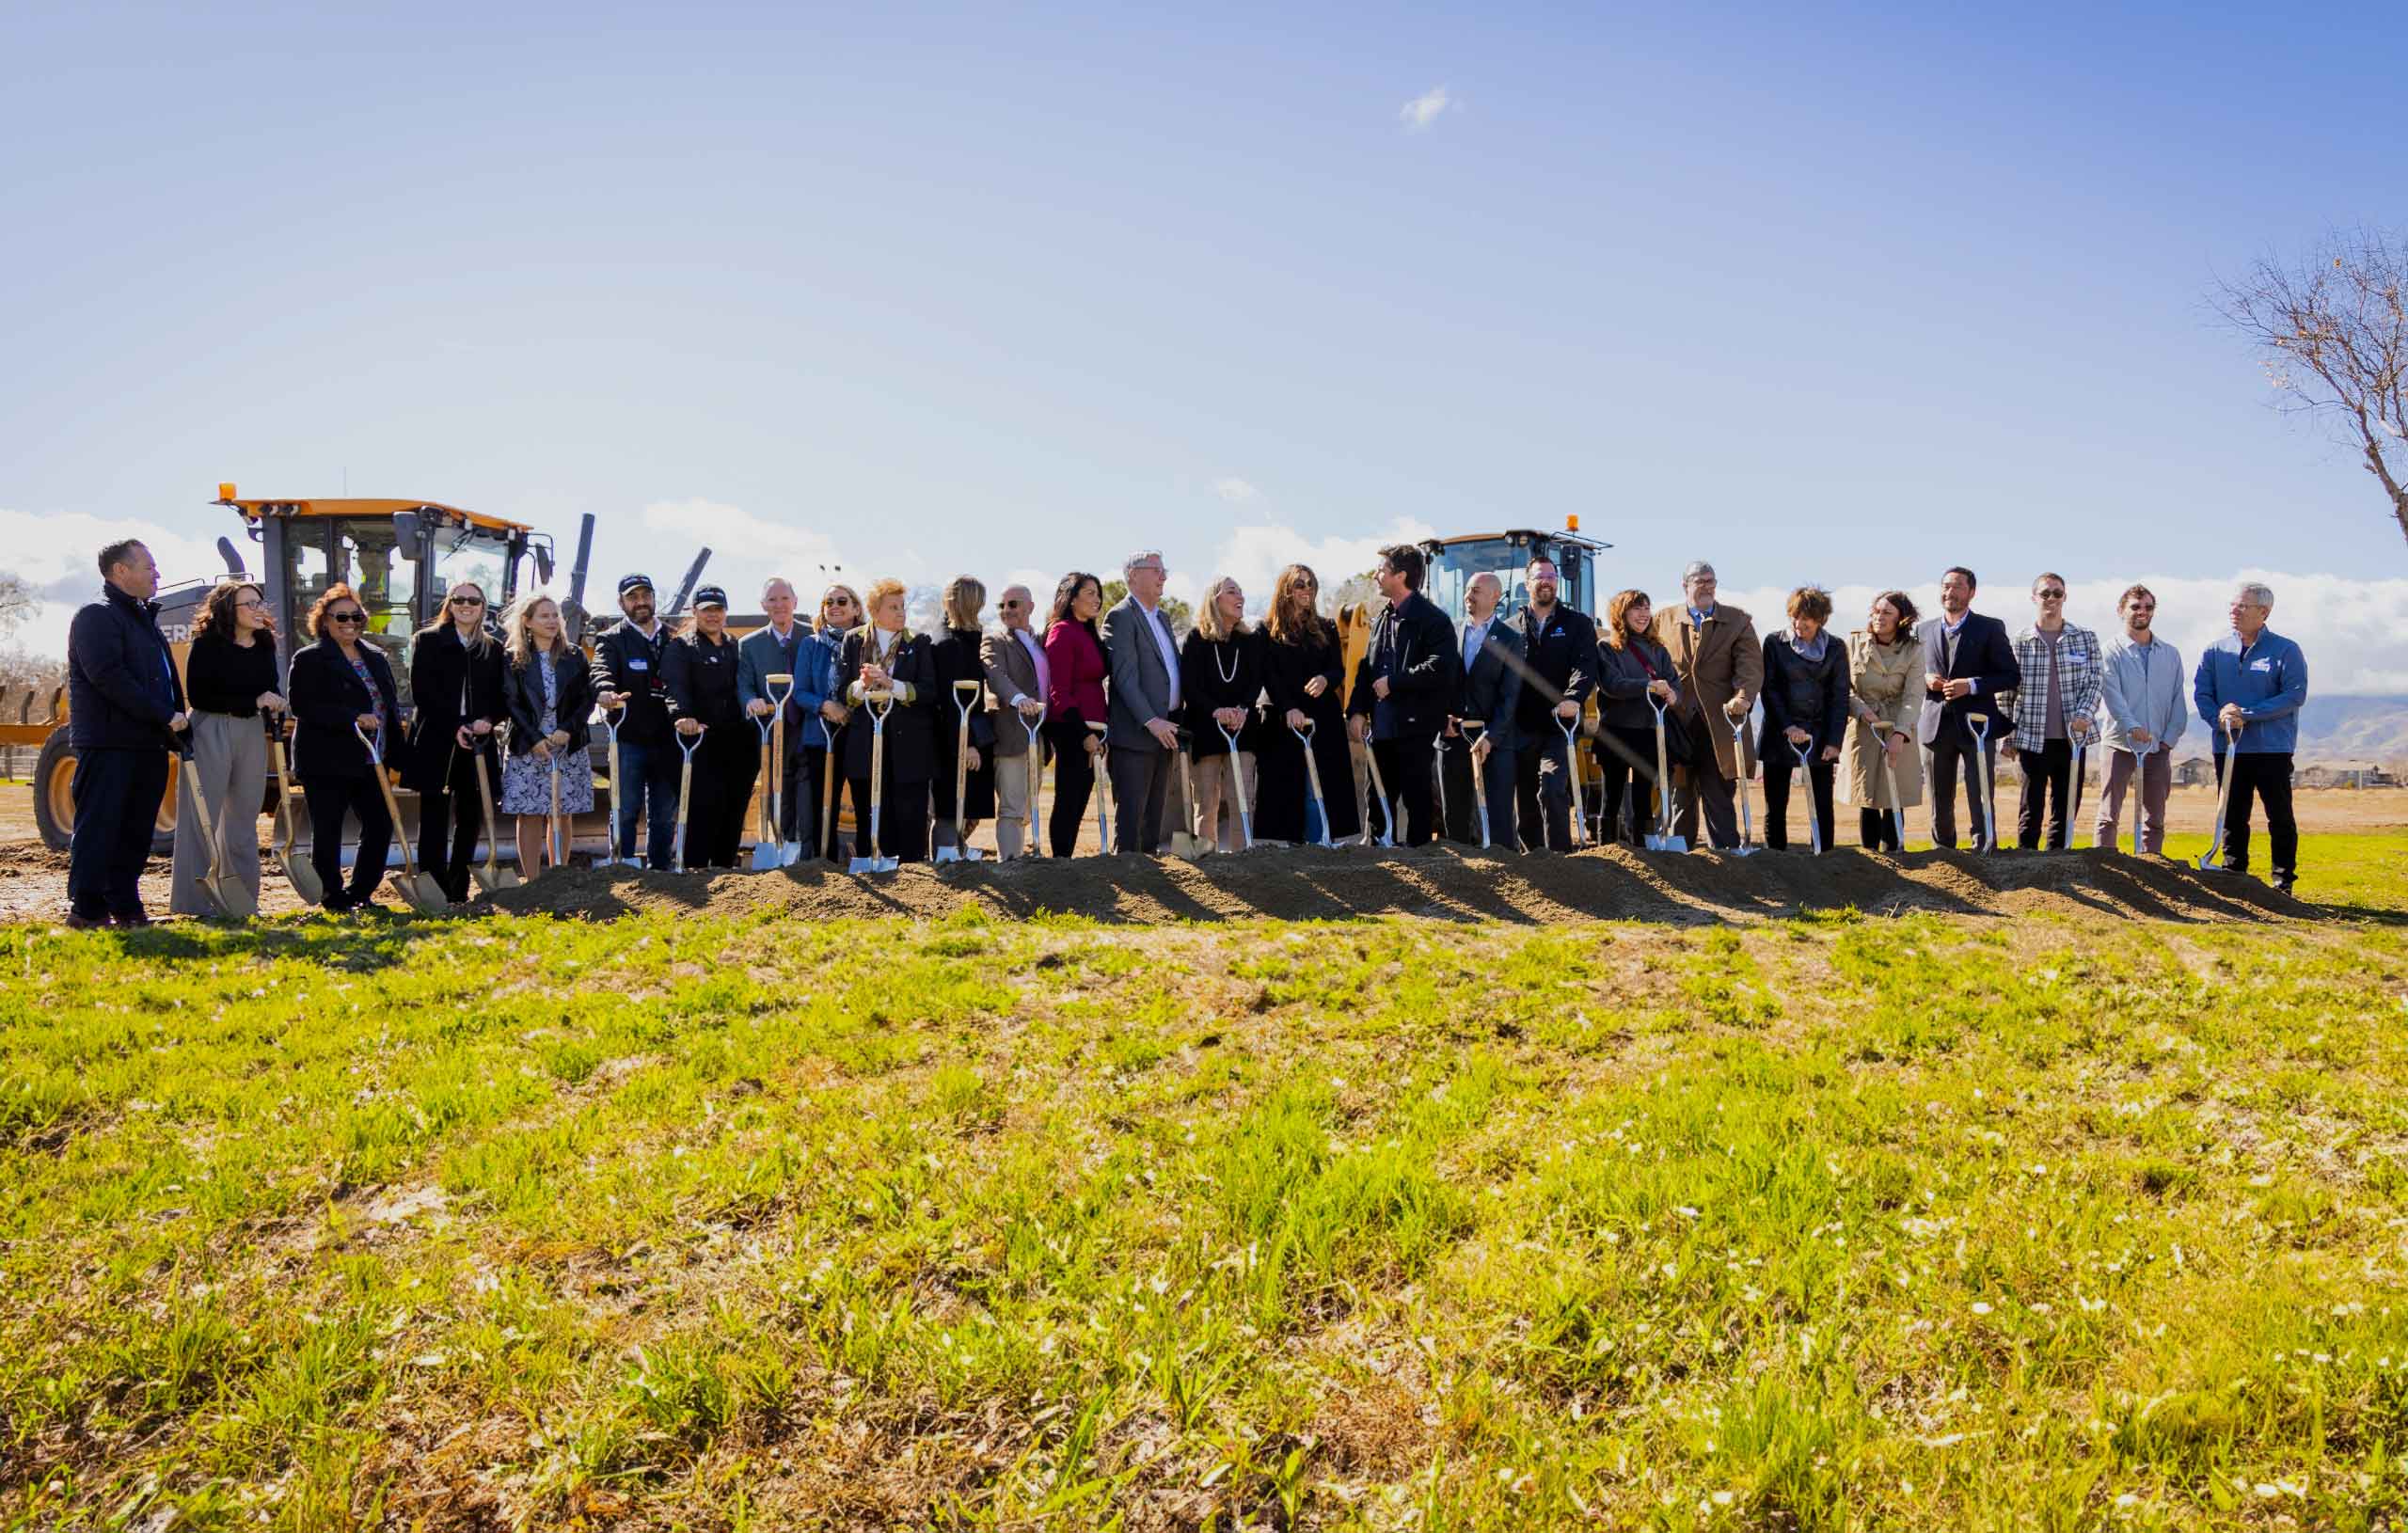 A large group of people standing on grass with shovels.